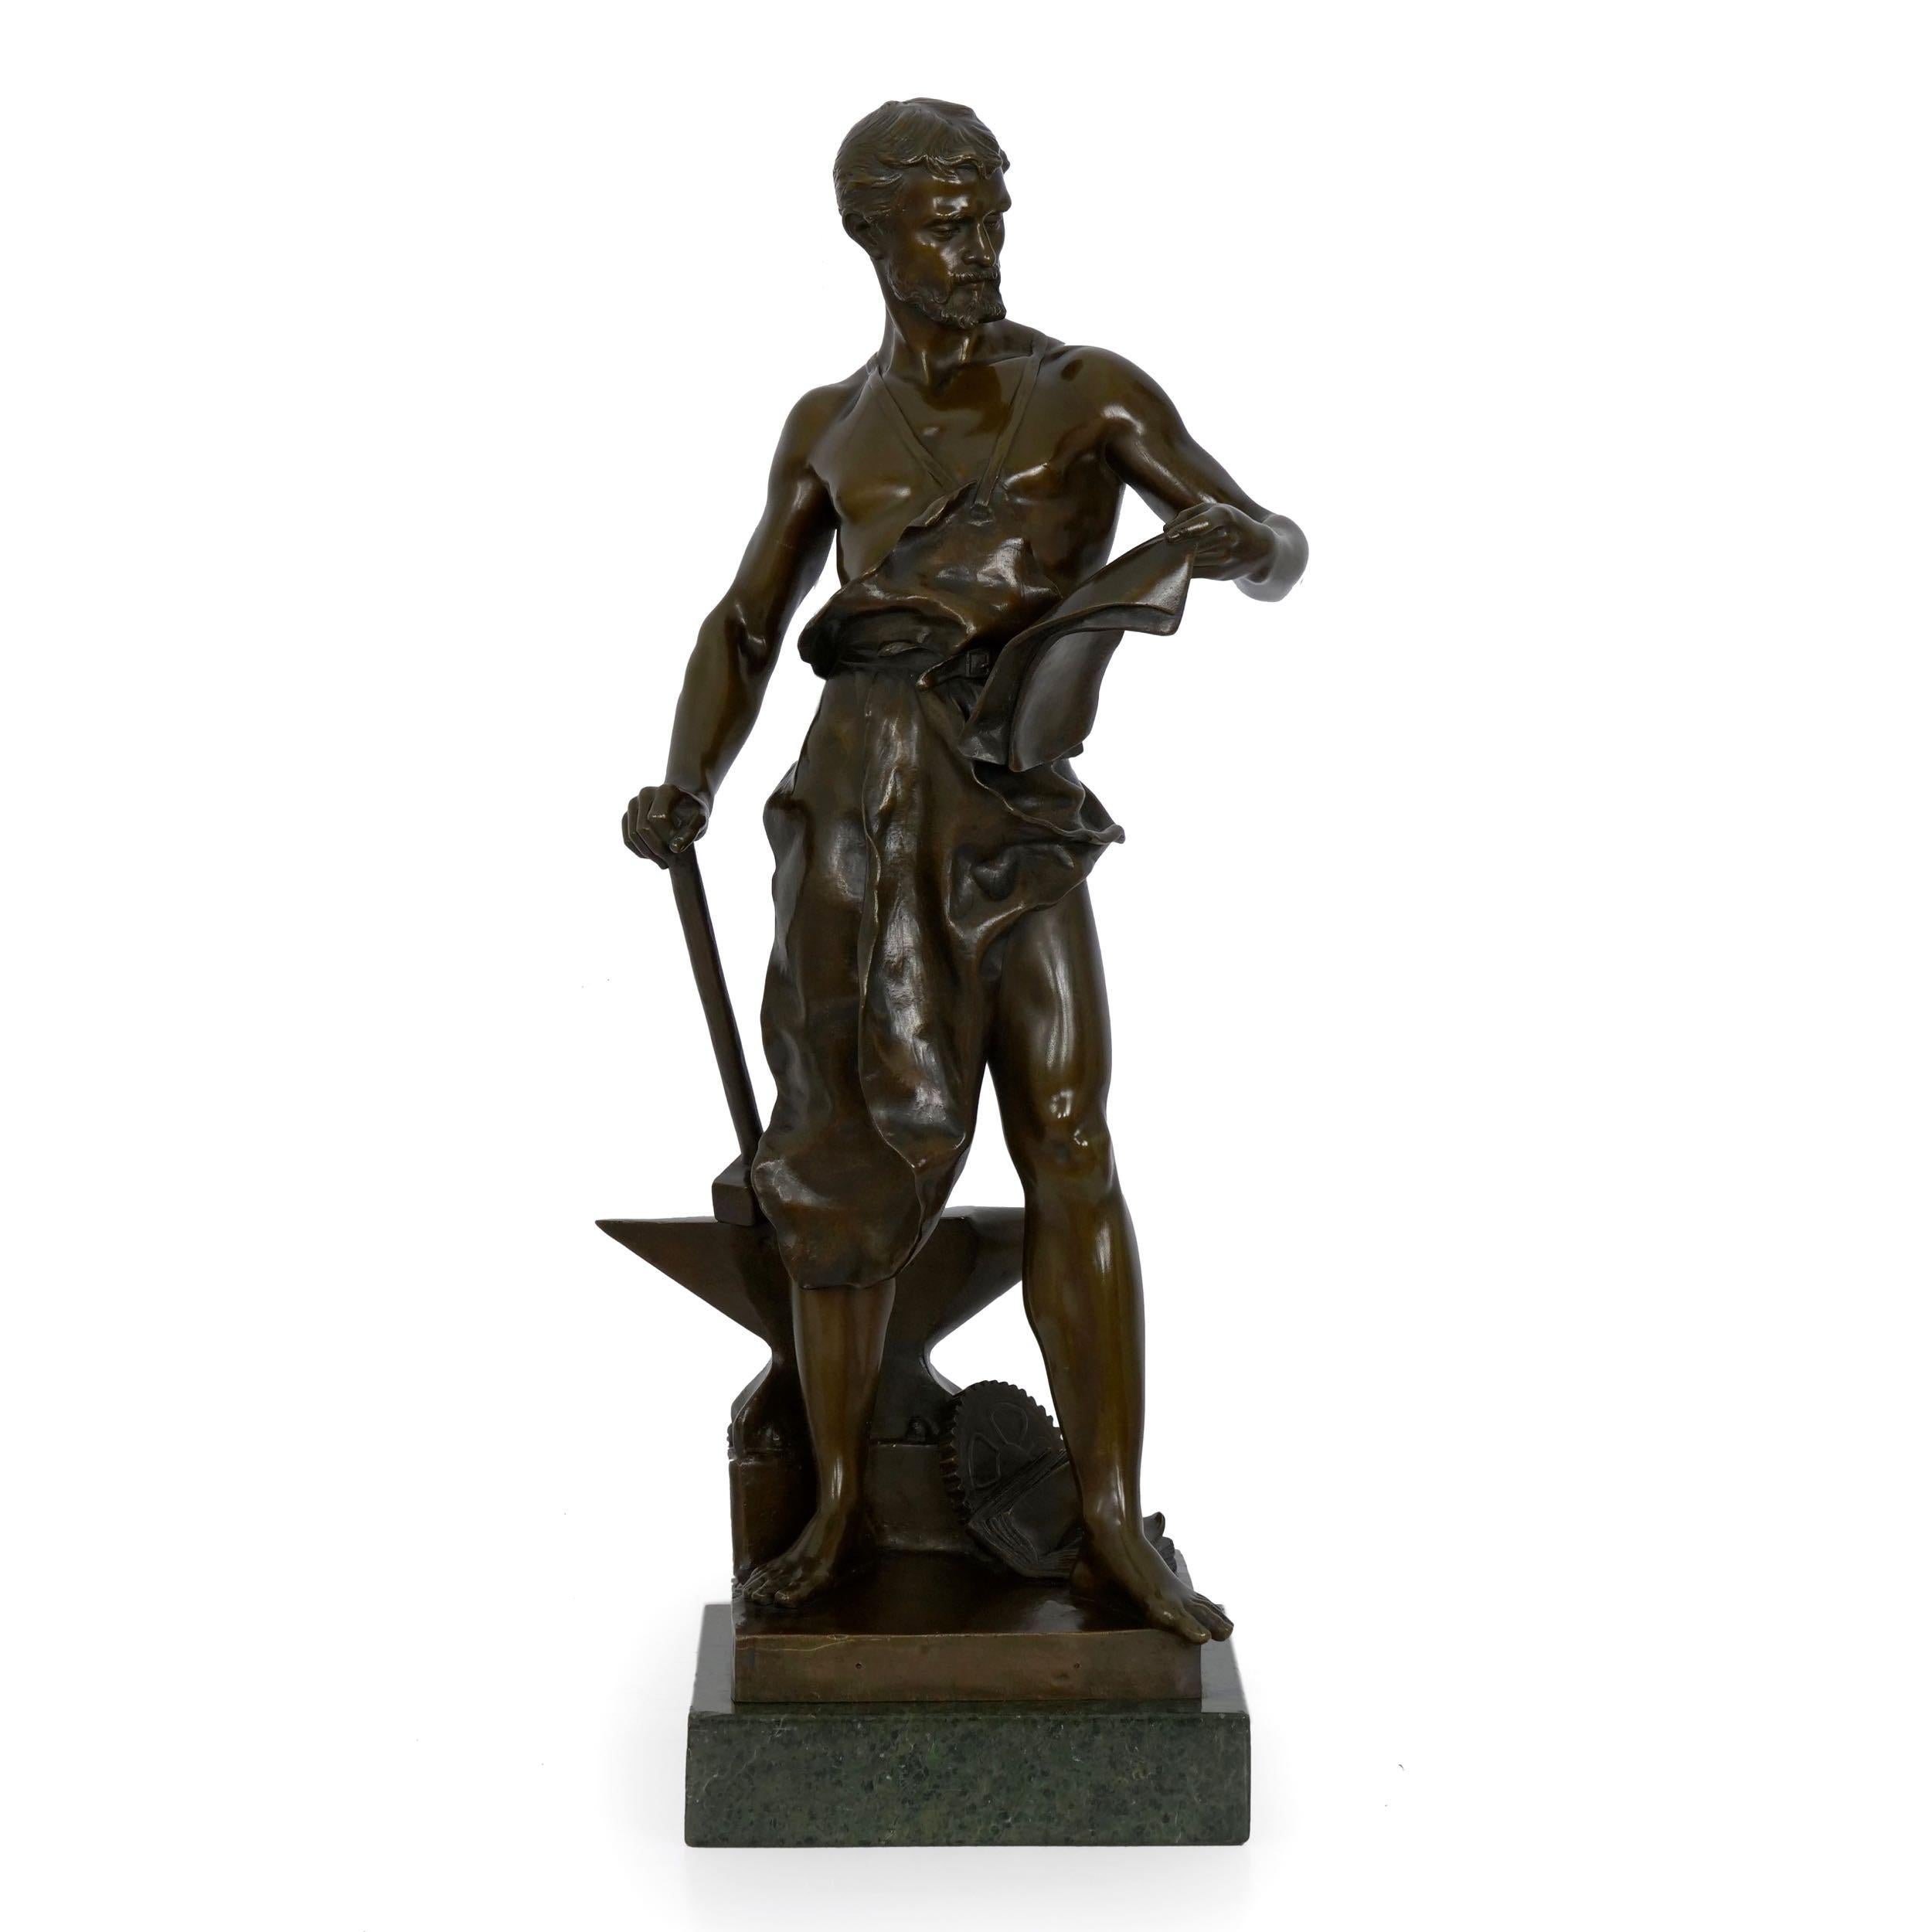 A finely executed study of a blacksmith busy at work in his shop, this exquisite casting by Jean-Baptiste Germain shows inordinate attention to detail with a hammered texture to the surface of the figure's skin throughout. Crisp chiseling of the